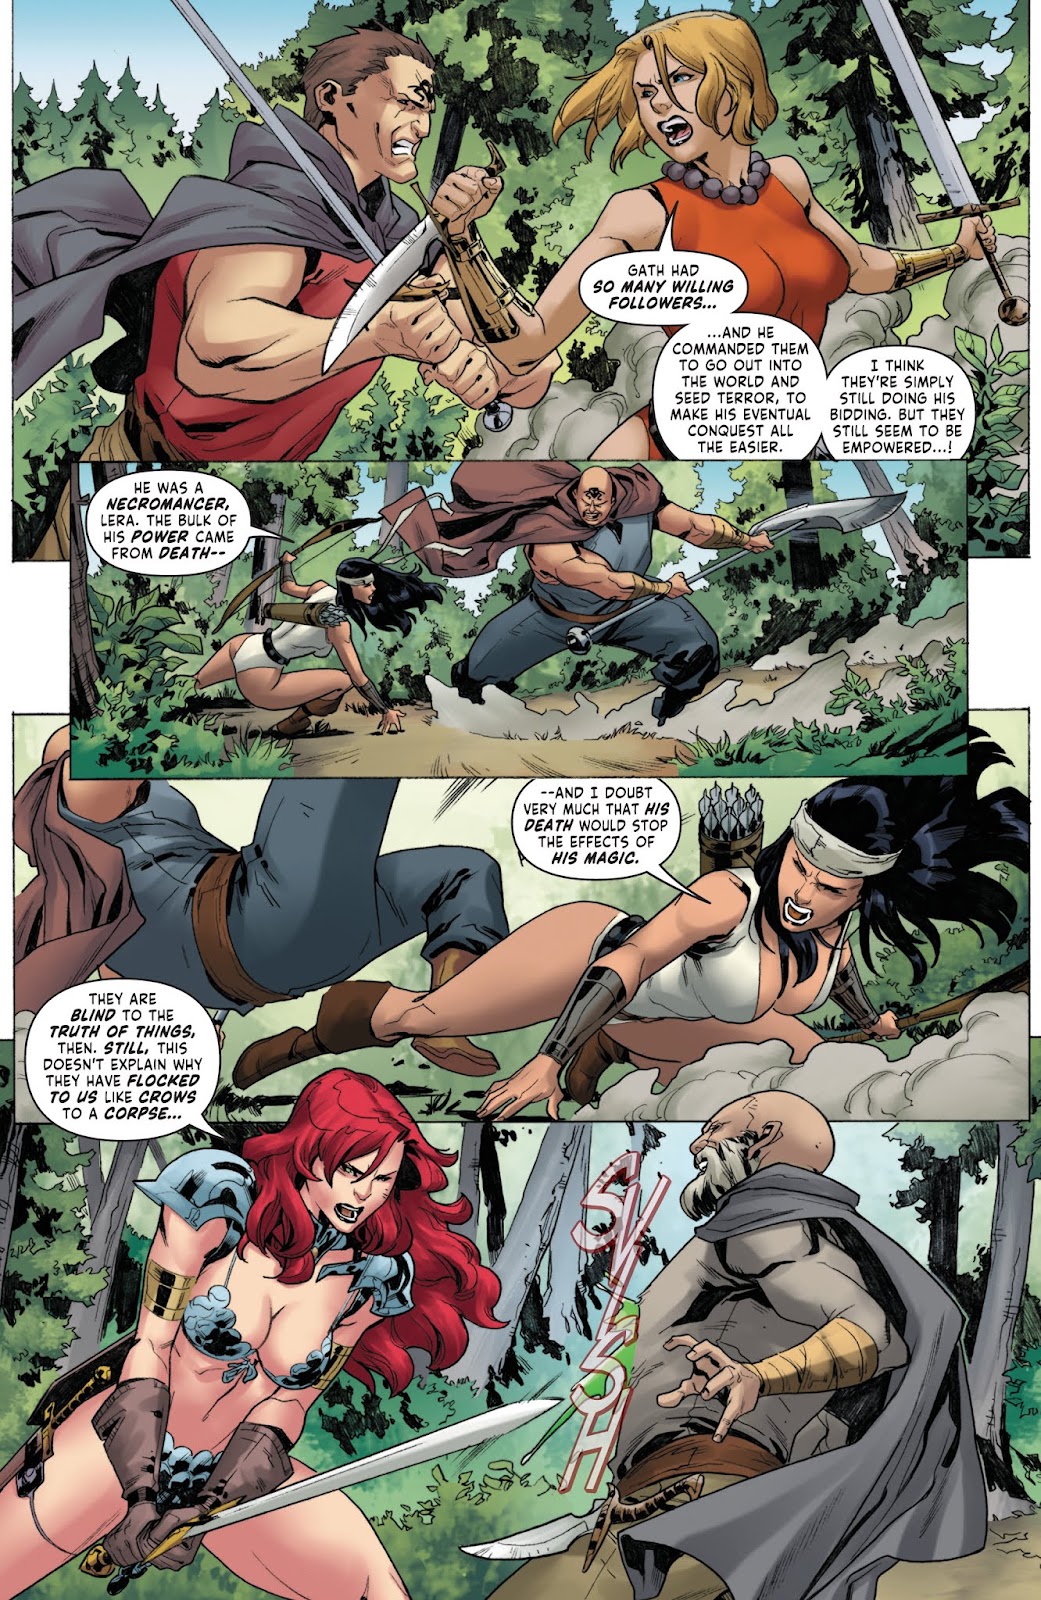 Red Sonja Vol. 4 issue 18 - Page 10